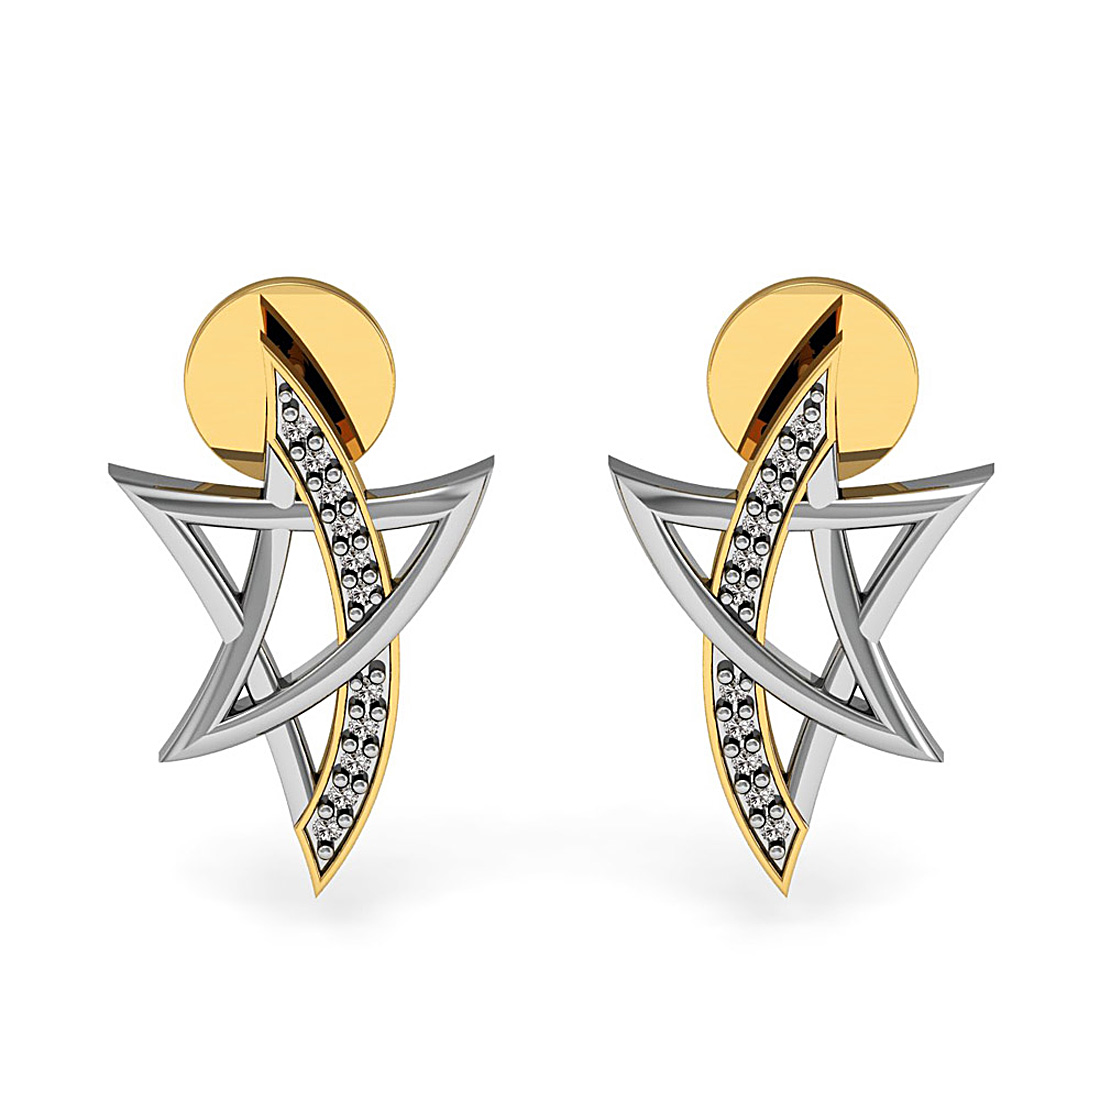 18k solid gold star shape stud earrings with real diamond